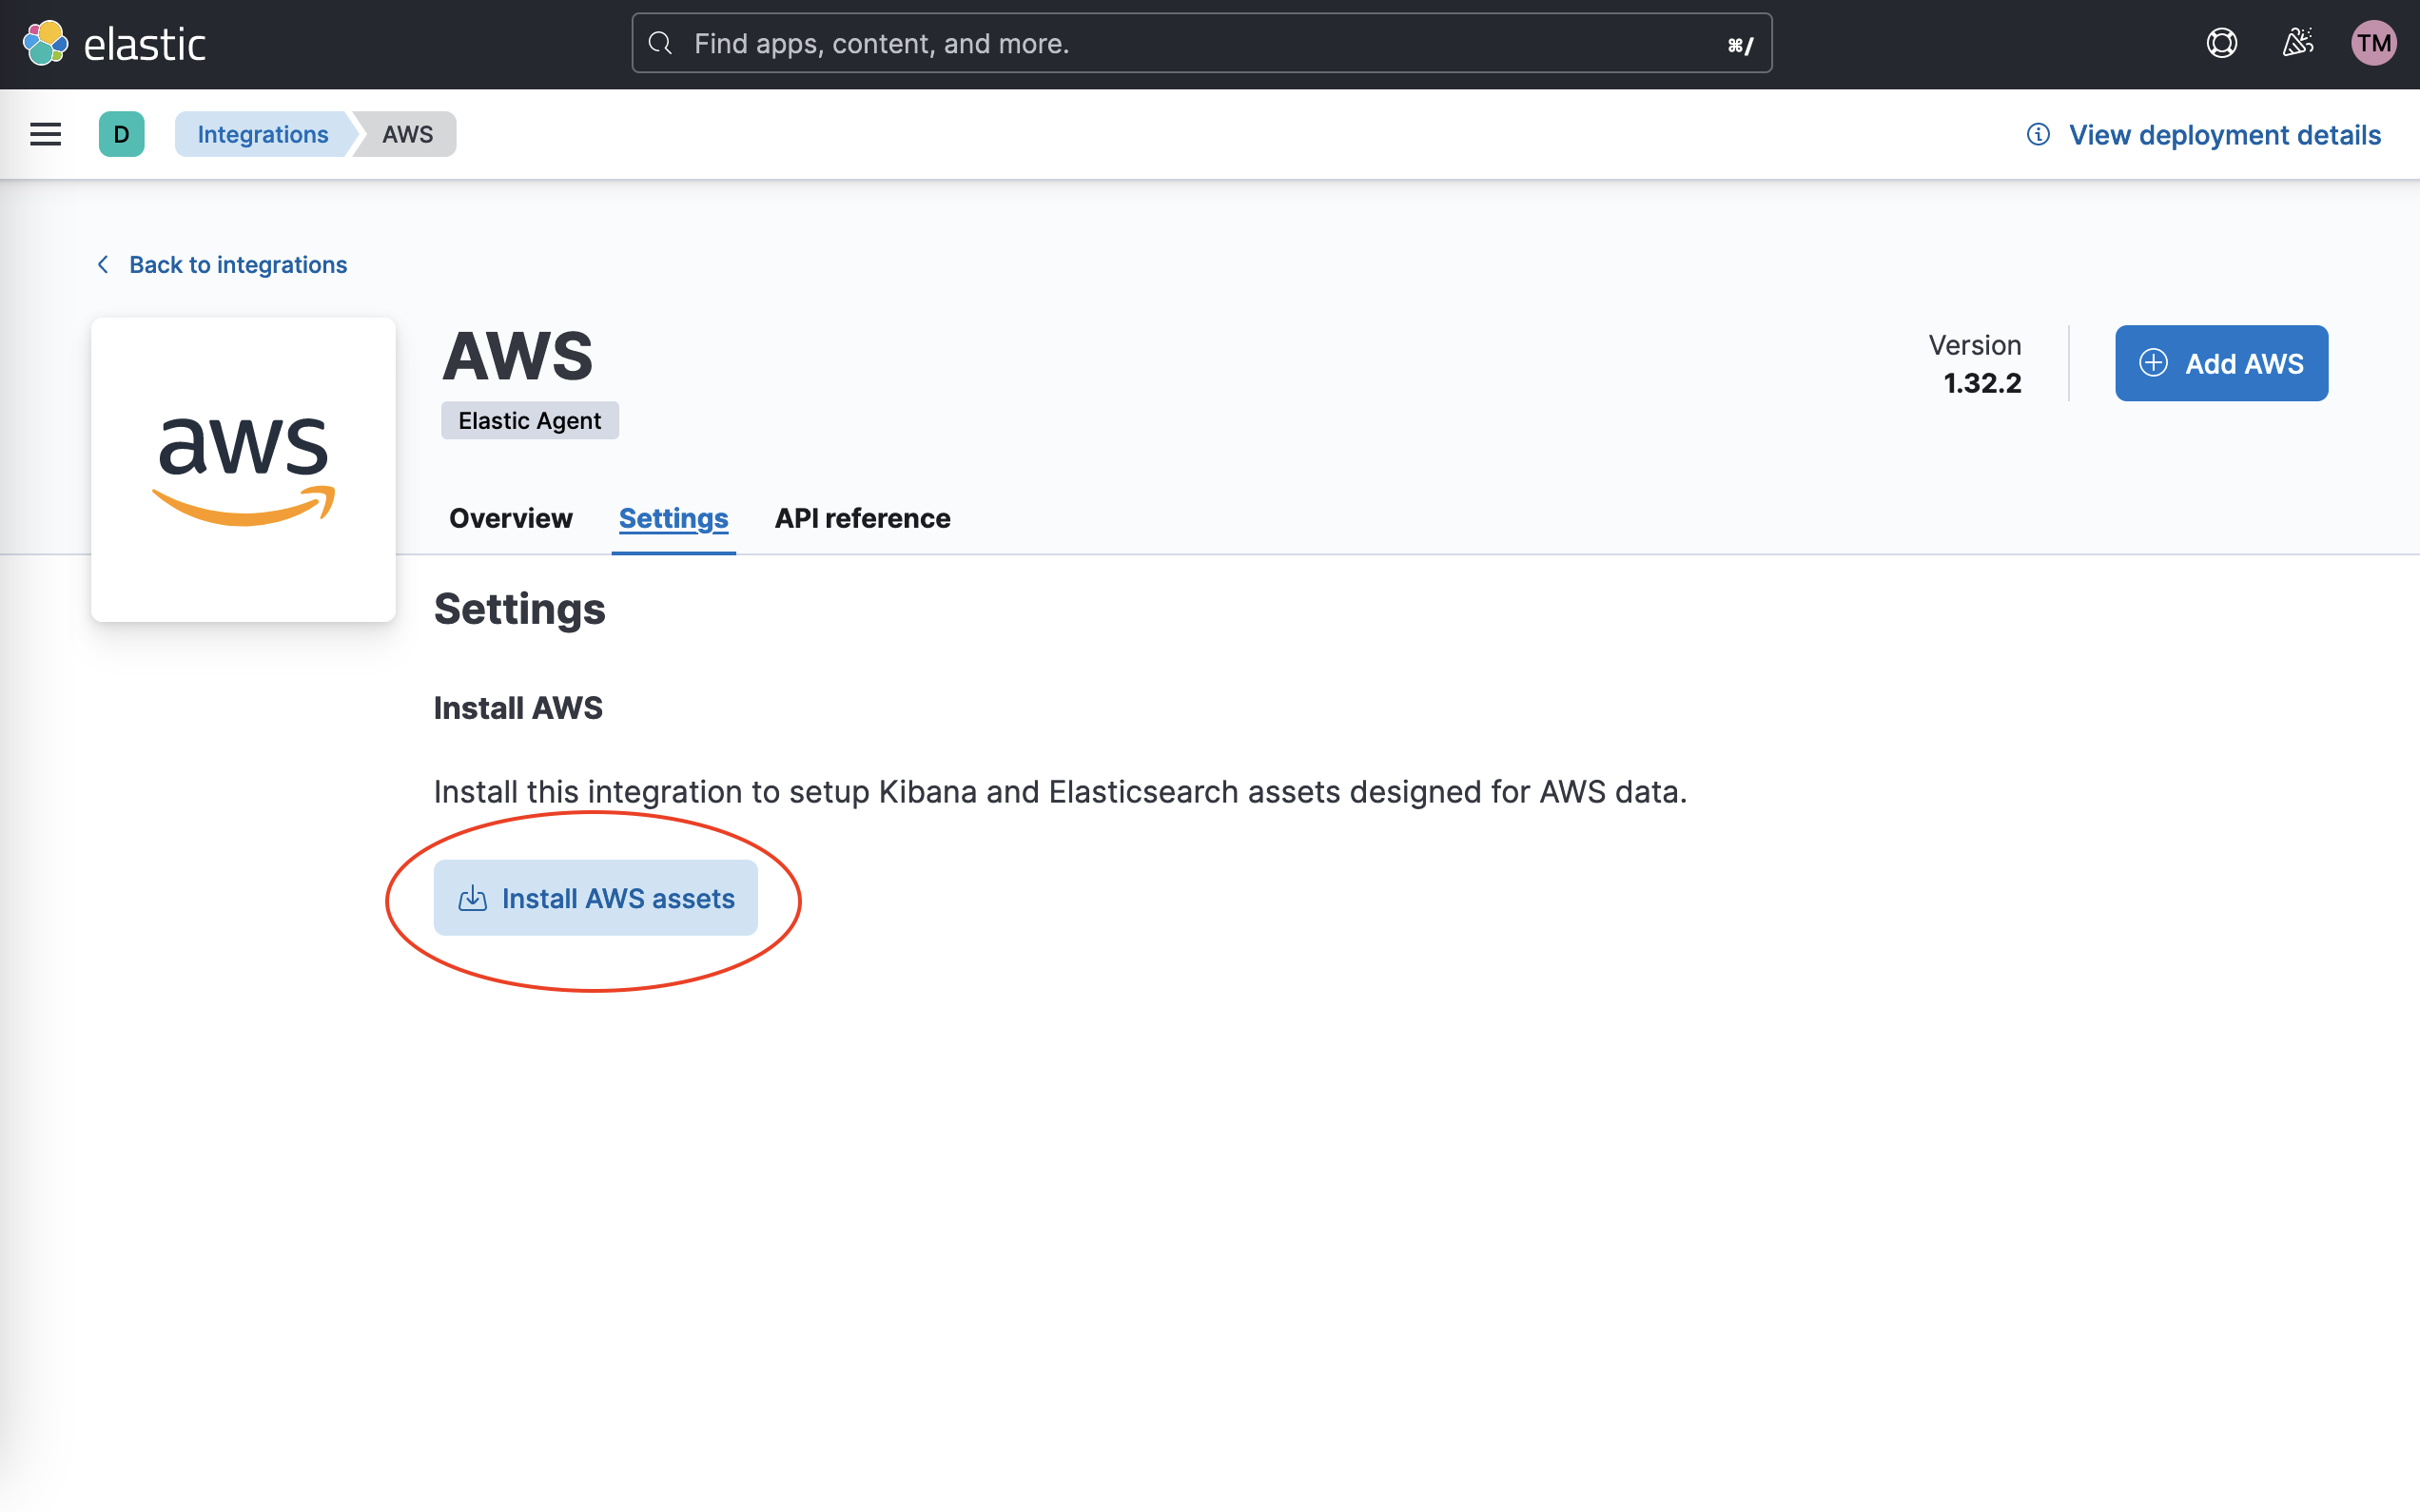 AWS integration settings page with the "Install AWS assets" button highlighted